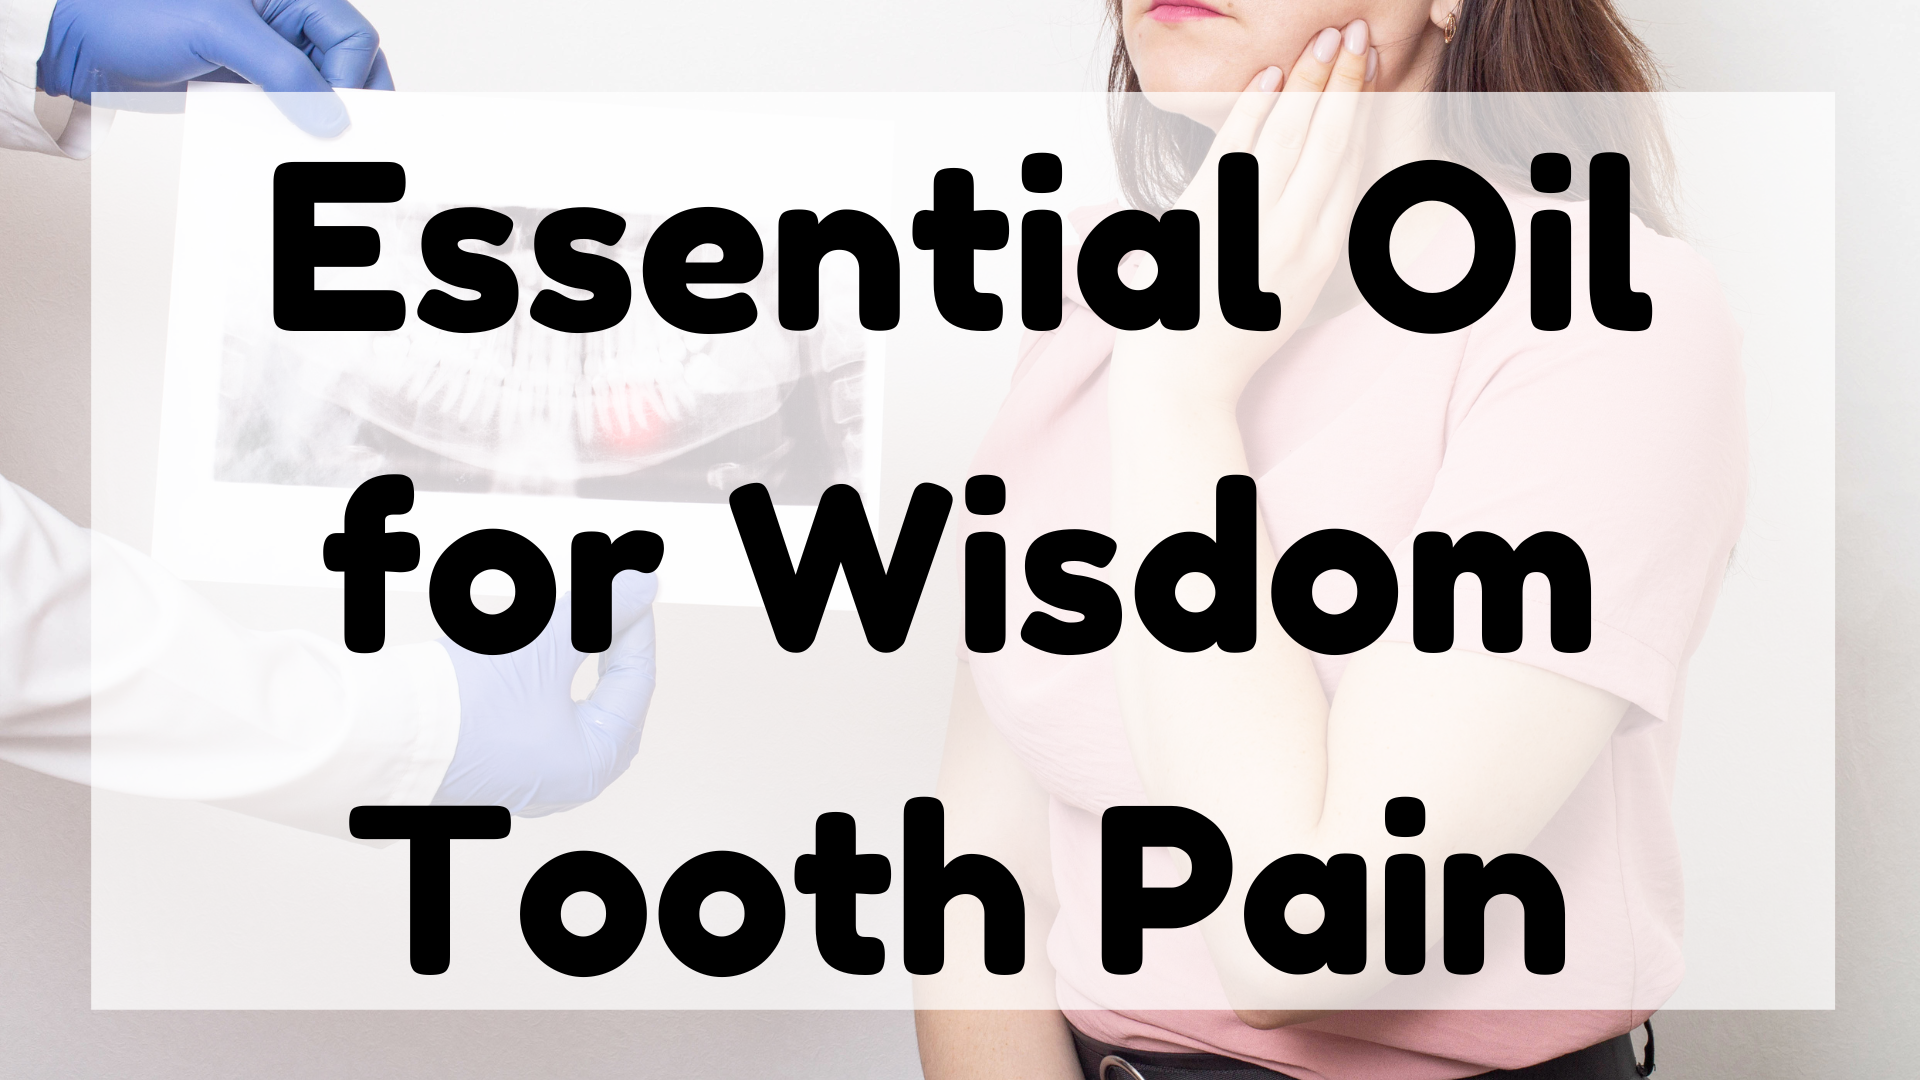 Essential Oil for Wisdom Tooth Pain featured image